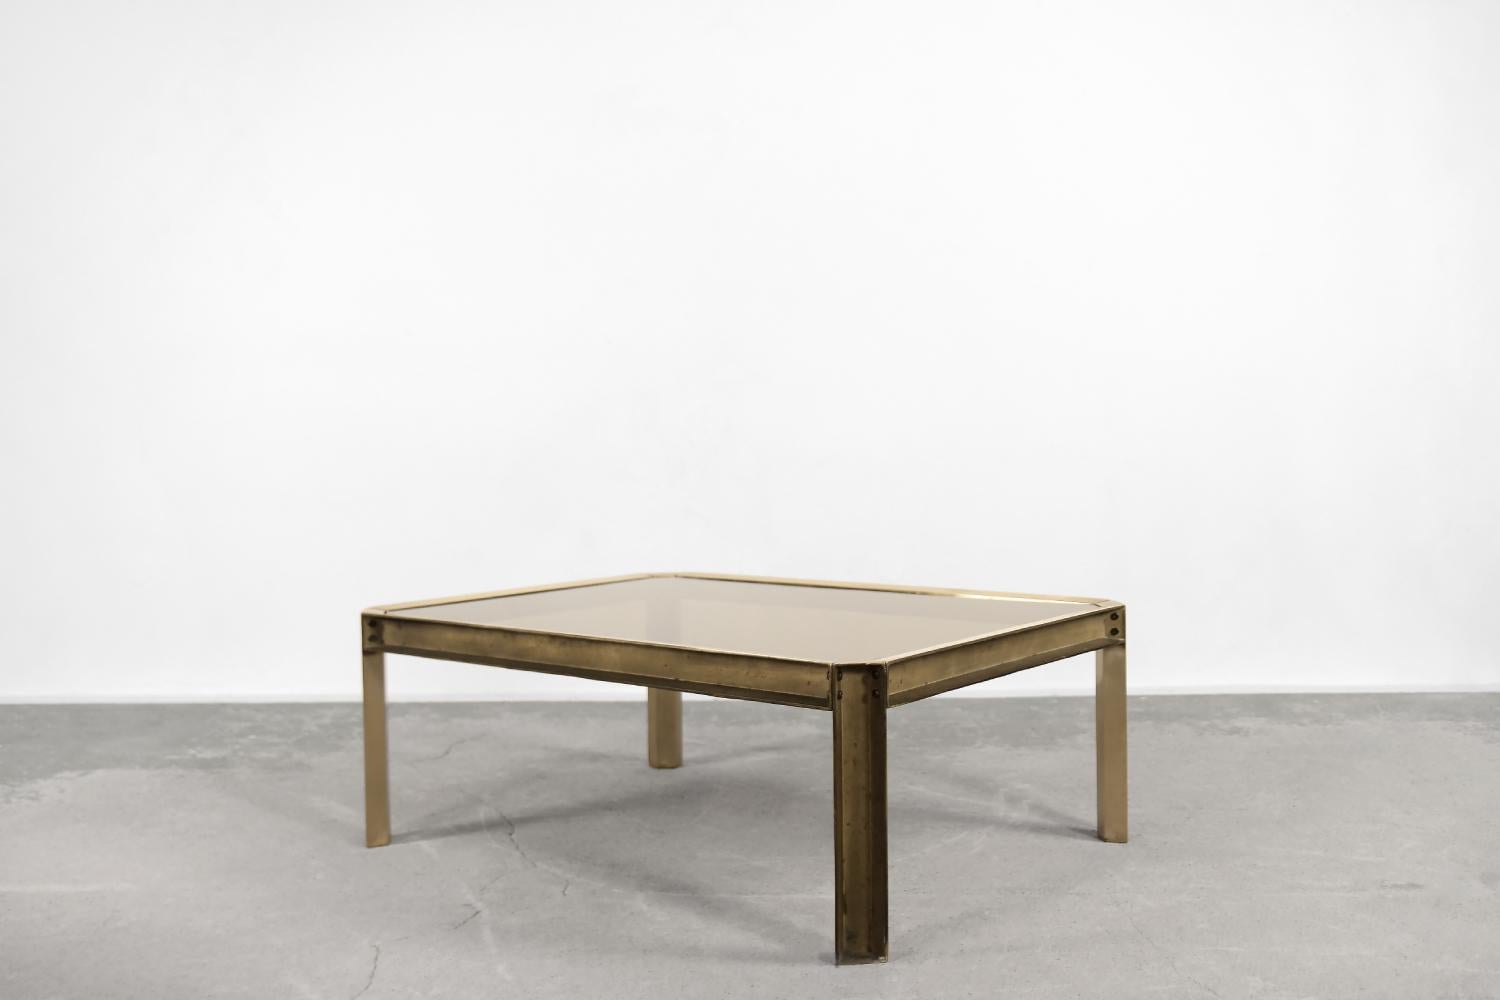 This large T09 Embassy coffee table was designed by Peter Ghyczy in 1972. I was handcrafted from cast brass and a smoked glass top. The inner surface was finished in raw way, in a brutalist style. The roughness and naturalness of the metal are